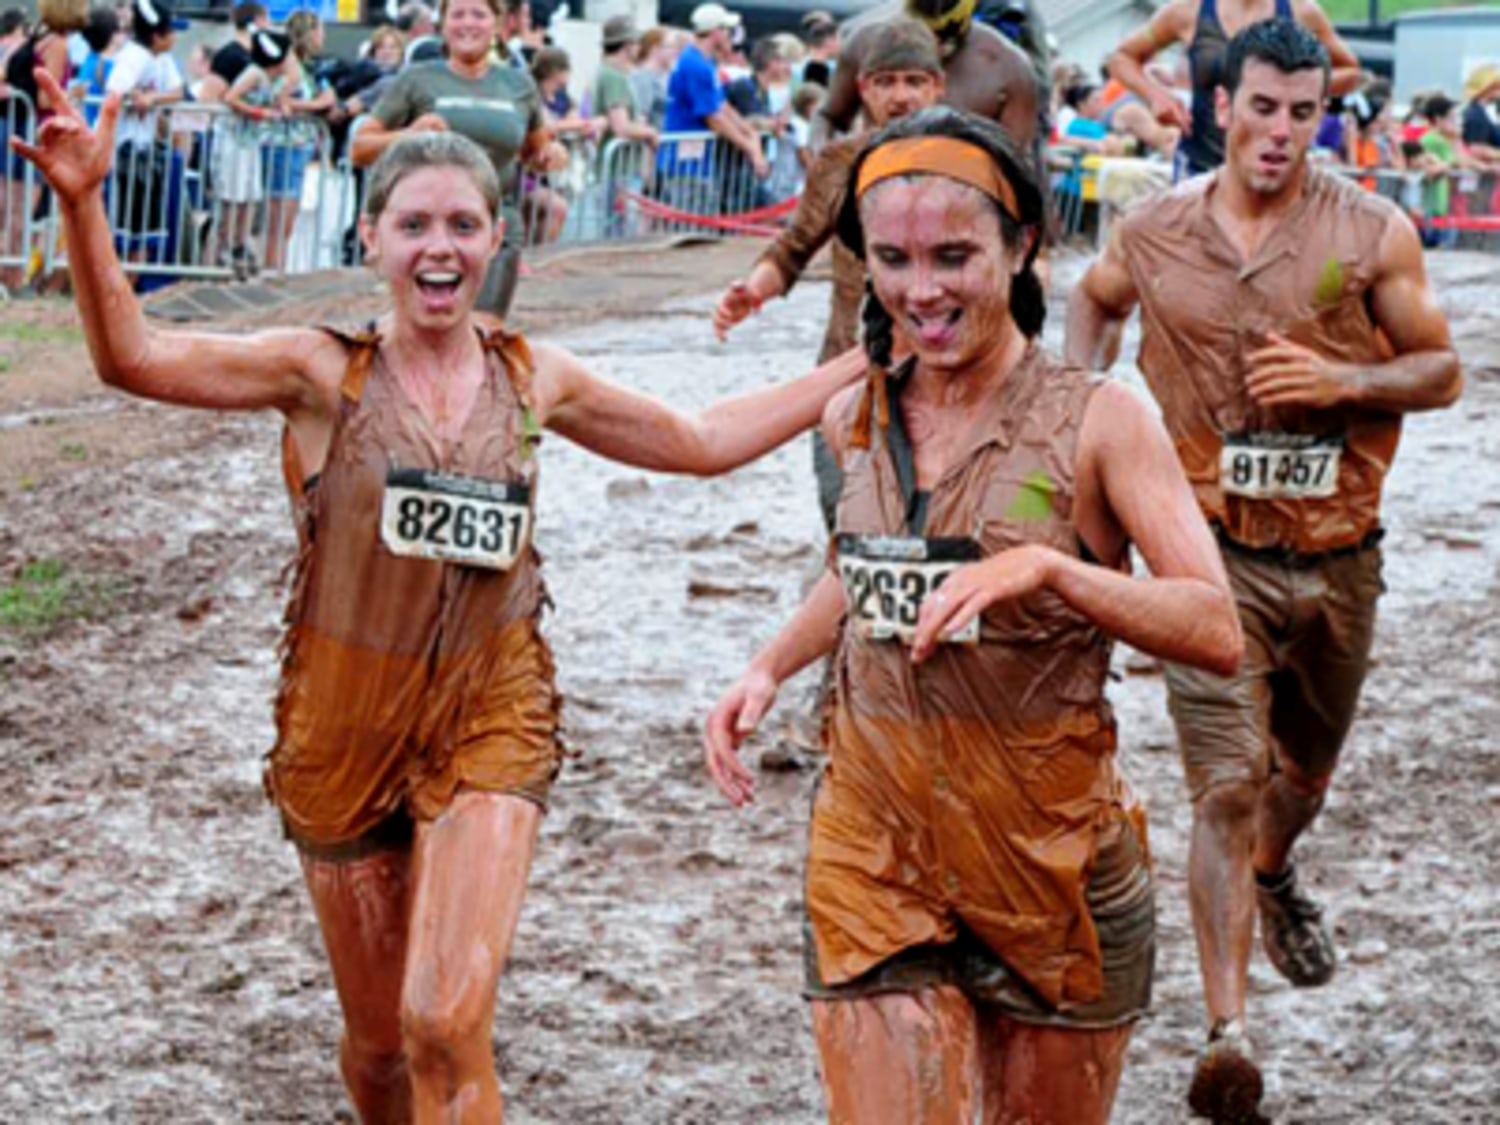 What is a mud run? What is it, and how does one participate? Where